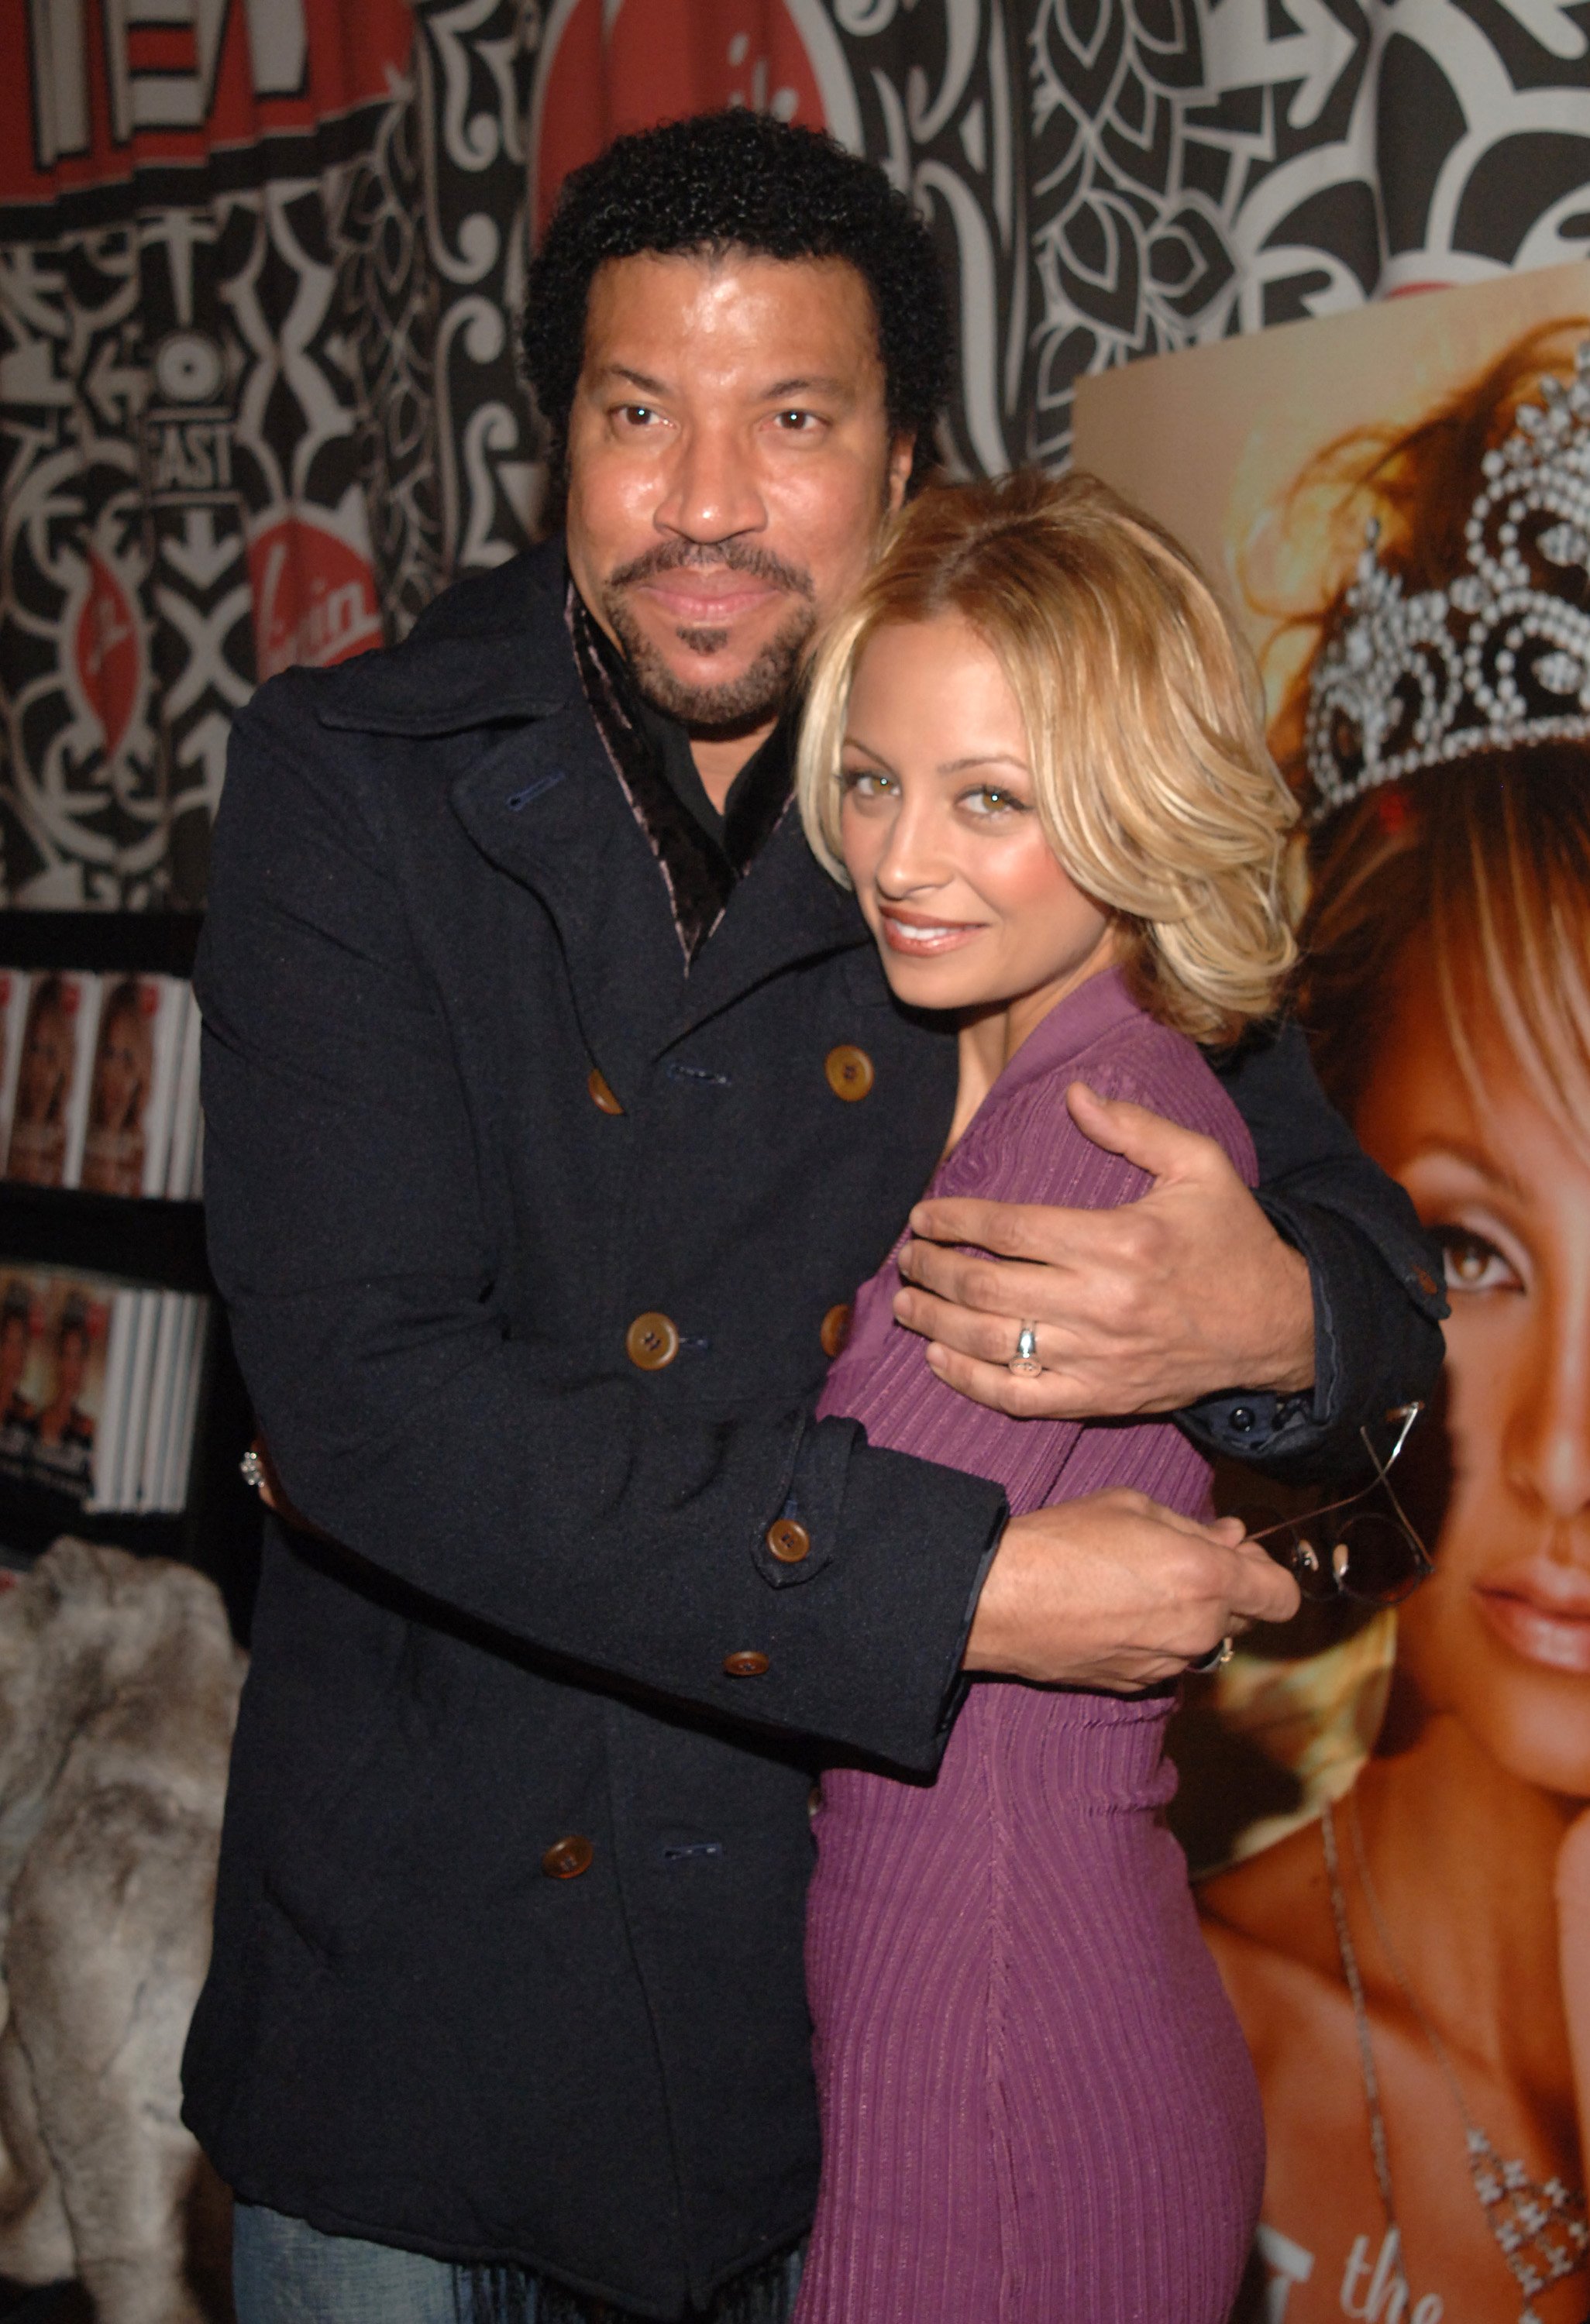 LIonel Richie and Nicole Richie attends "The Truth About Diamonds" book signing event in New York City on November 10, 2005 | Photo: Getty Images